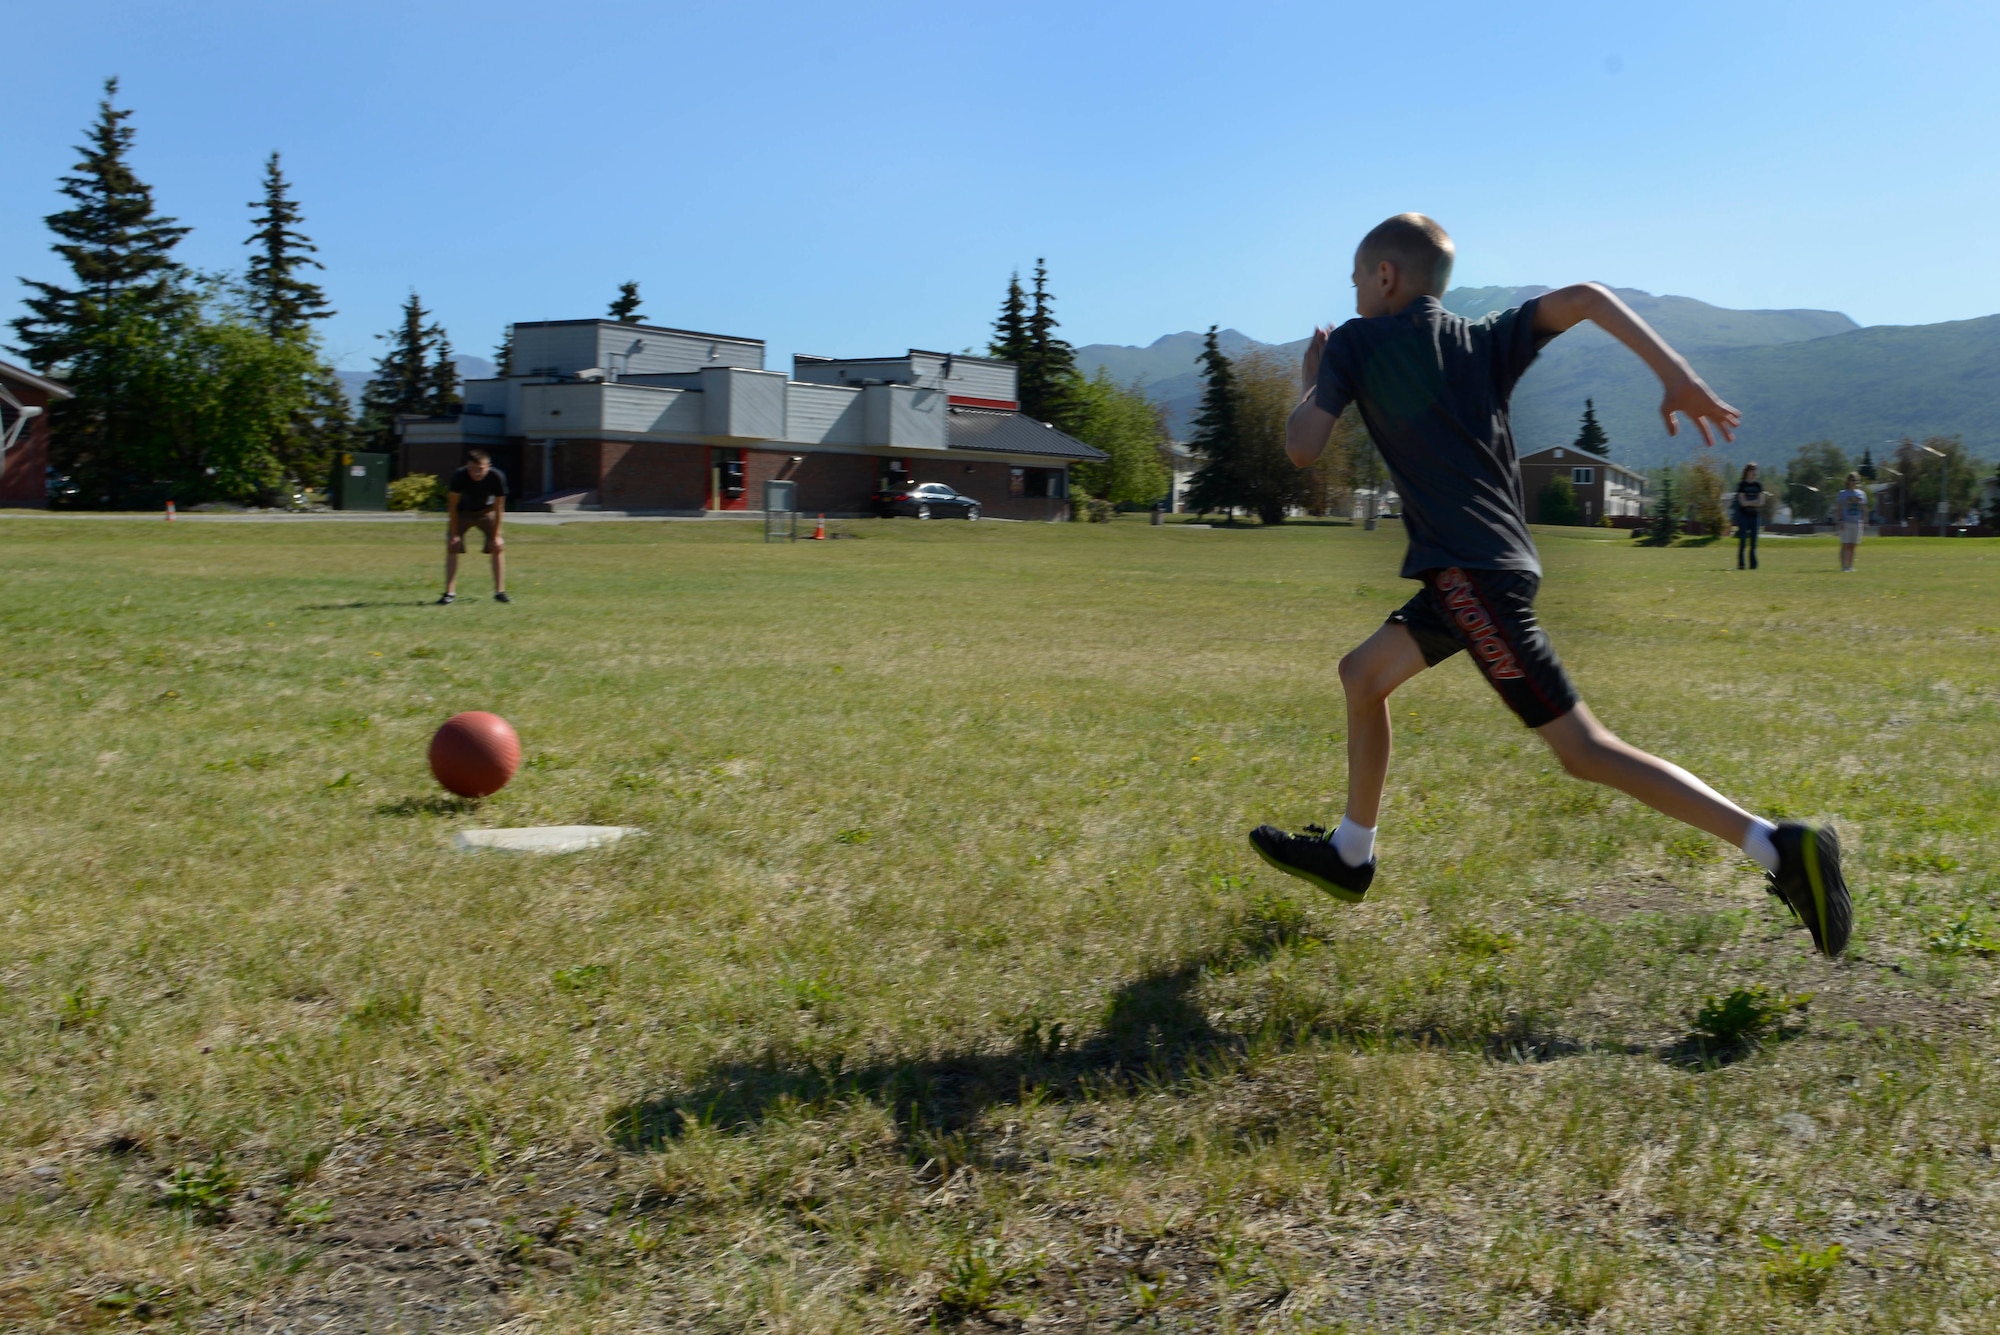 Children play kickball during the Read for the Win summer reading program at the Joint Base Elmendorf-Richardson Library, Alaska, June 16, 2016. During the program, participants submit their minutes read and qualify to win prizes. (U.S. Air Force photo by Airman 1st Class Valerie Monroy)